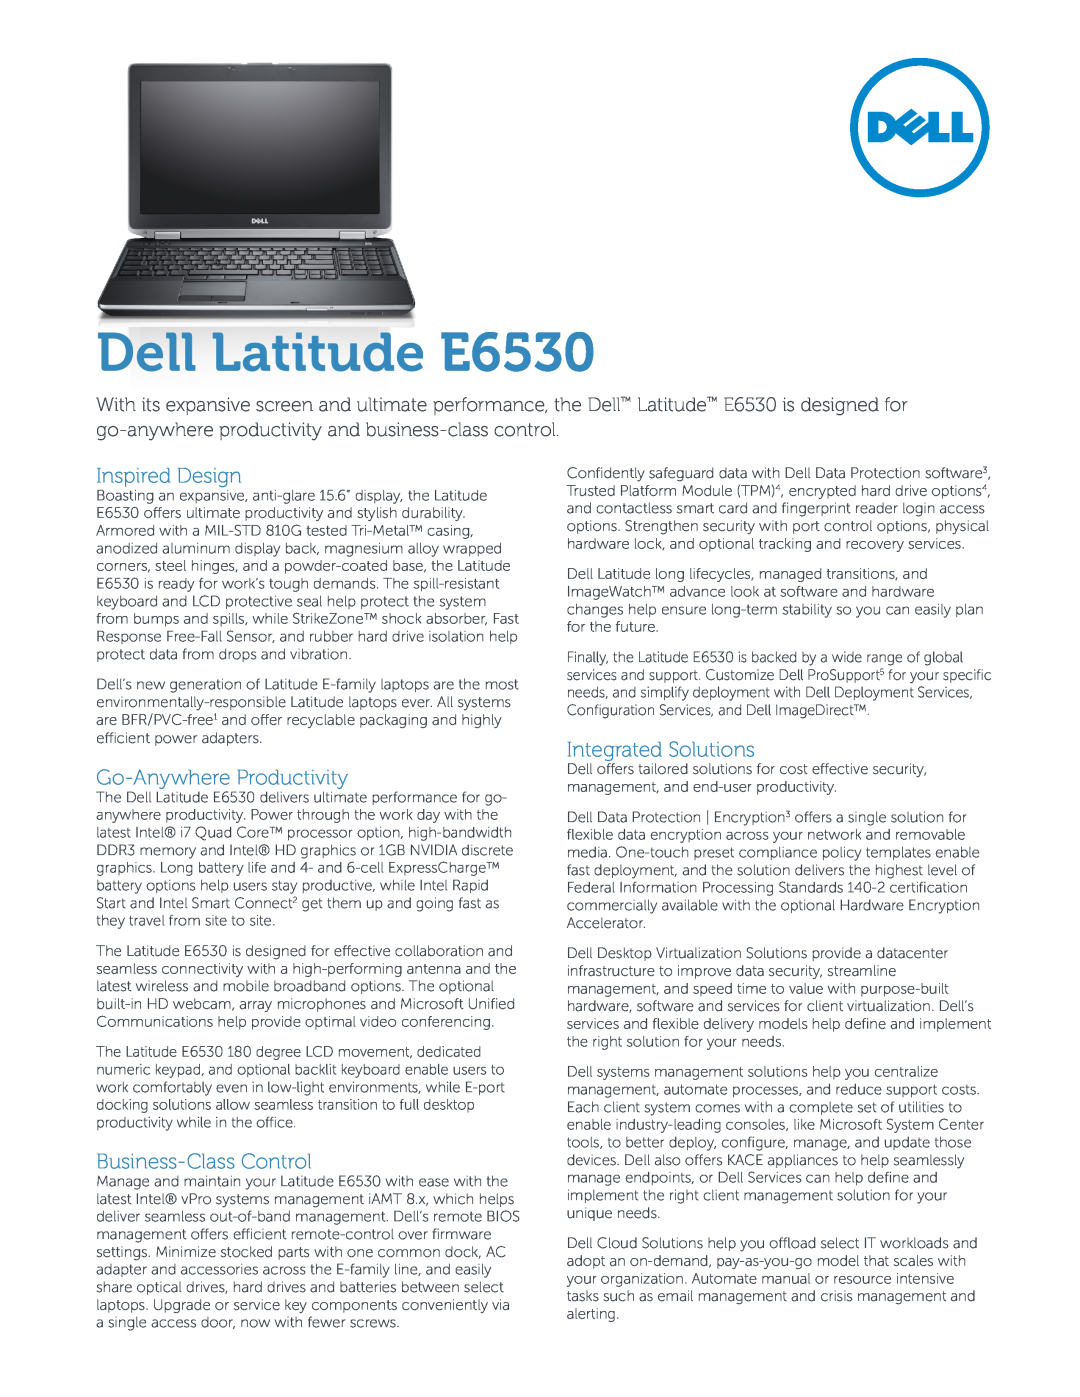 Dell E6430 ATG manual Setup and Features Information, Latitude E6430 Front and Back View, About Warnings, P25G002 2011 